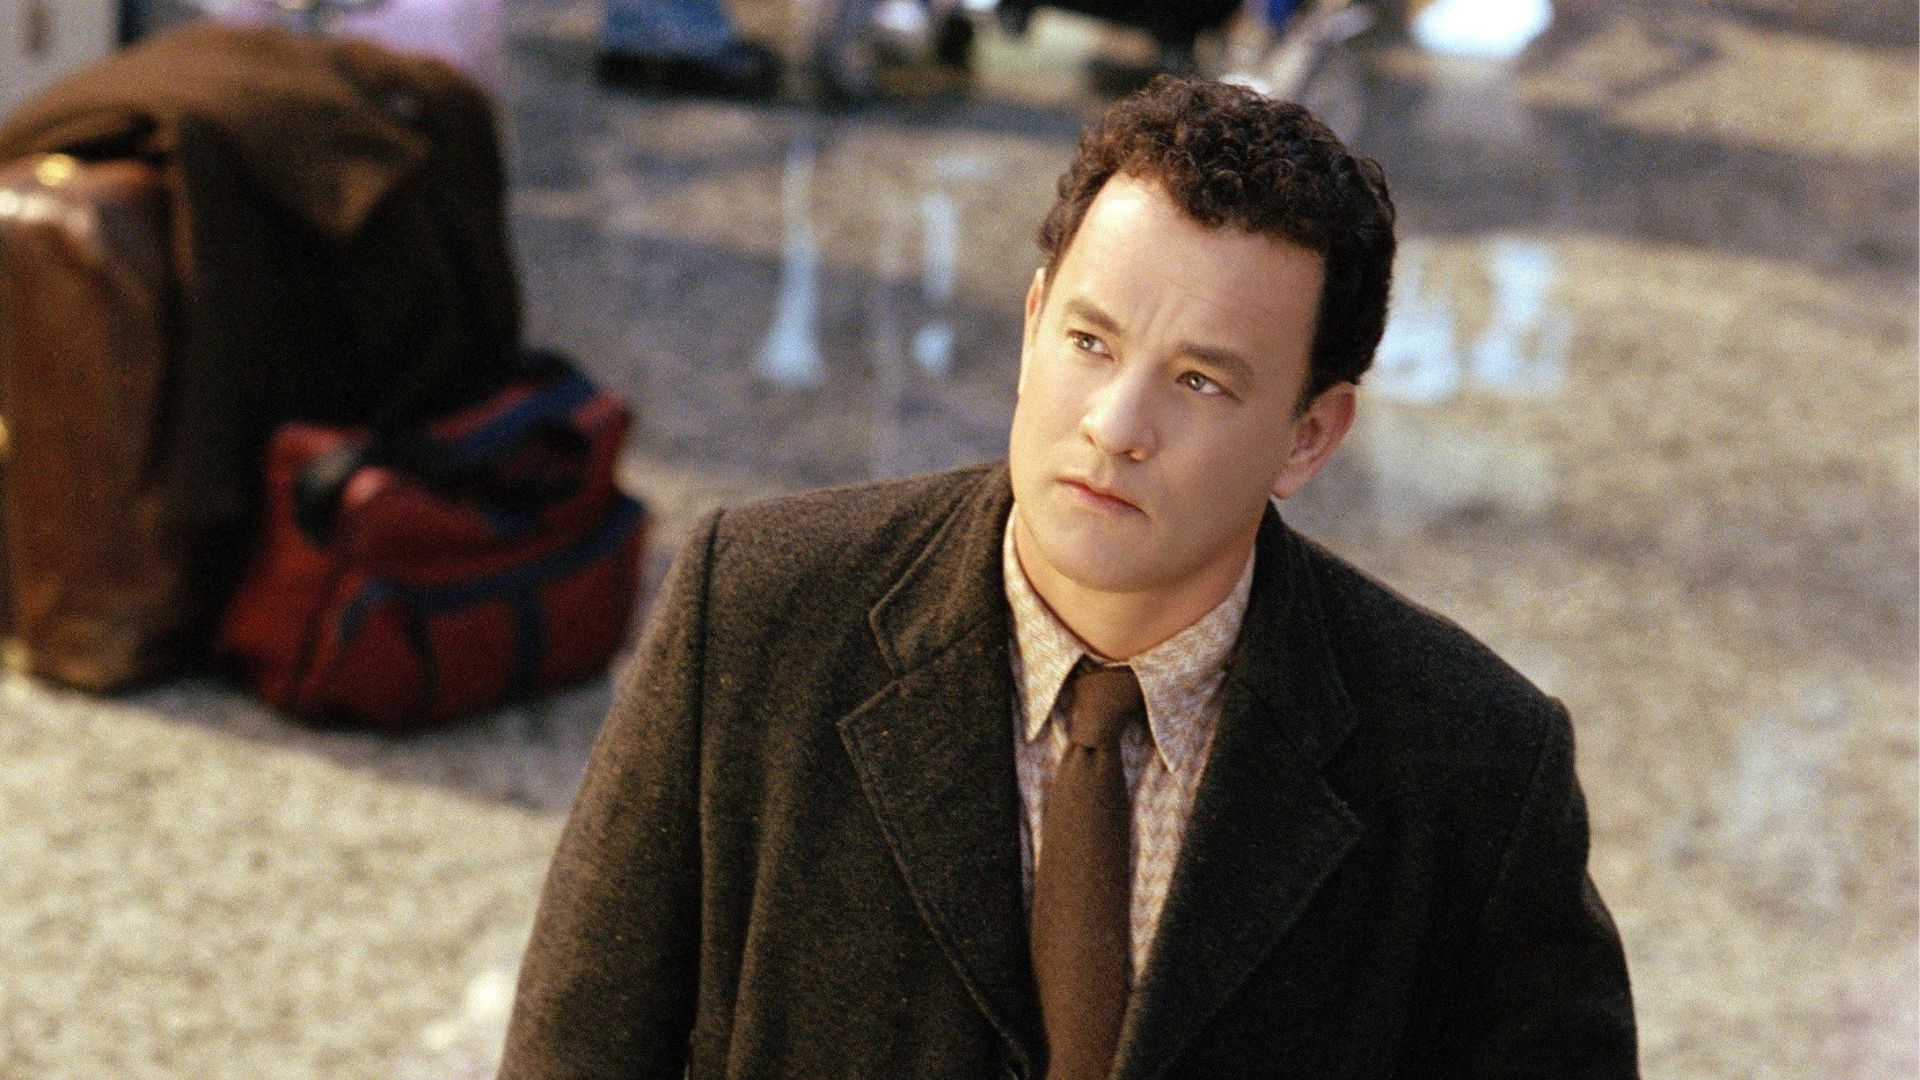 The Terminal, the man who inspired the movie with Tom Hanks died at Paris airport [FOTO]